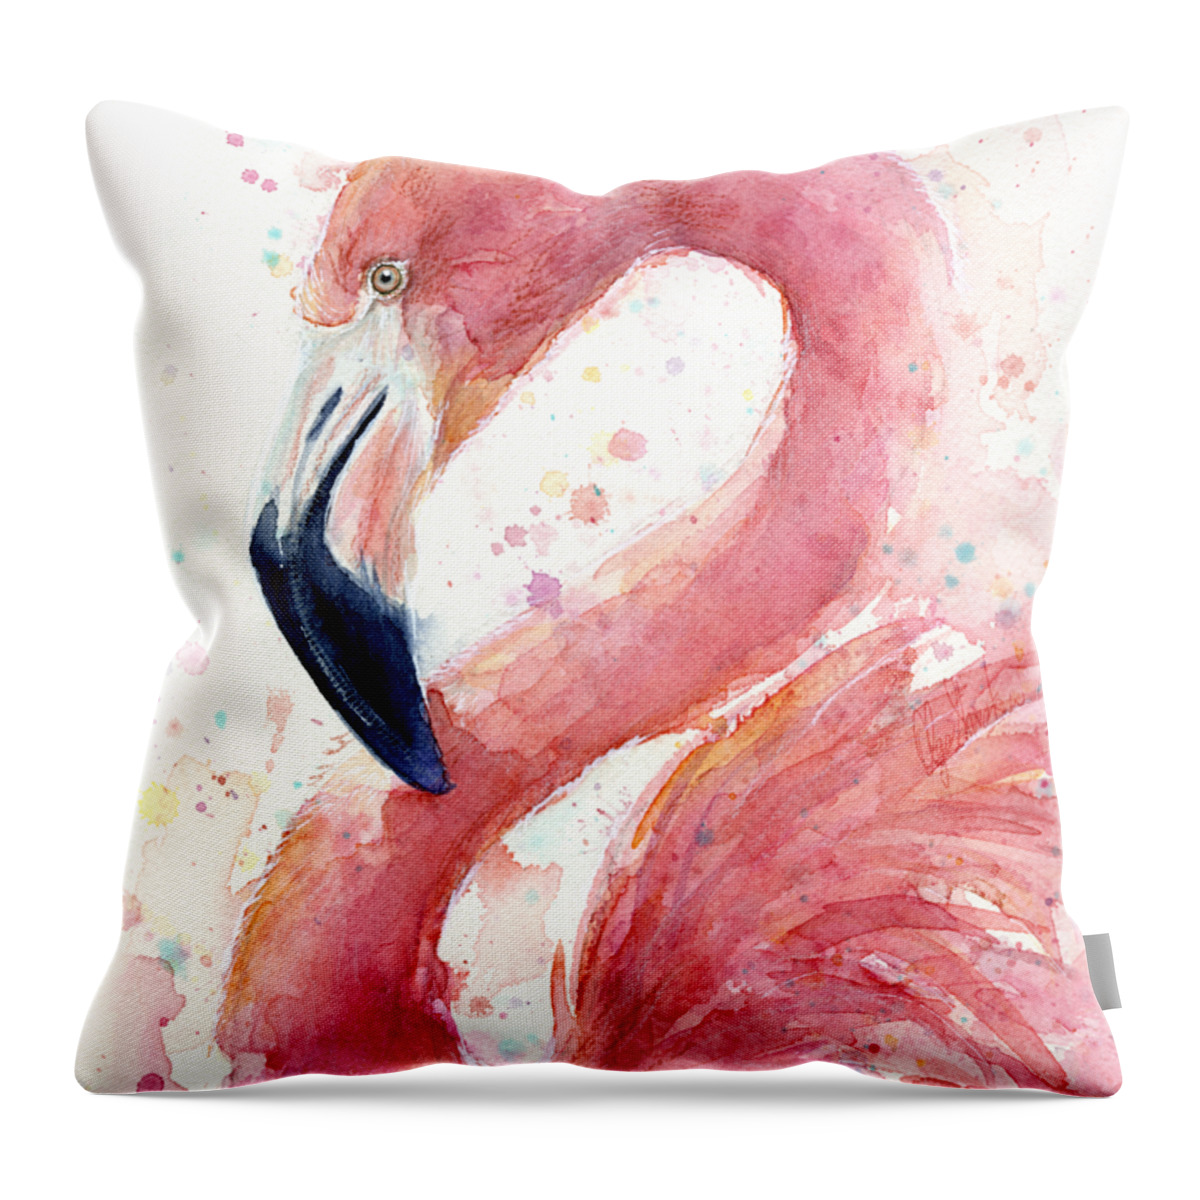 Flamingo Throw Pillow featuring the painting Flamingo Watercolor Painting by Olga Shvartsur